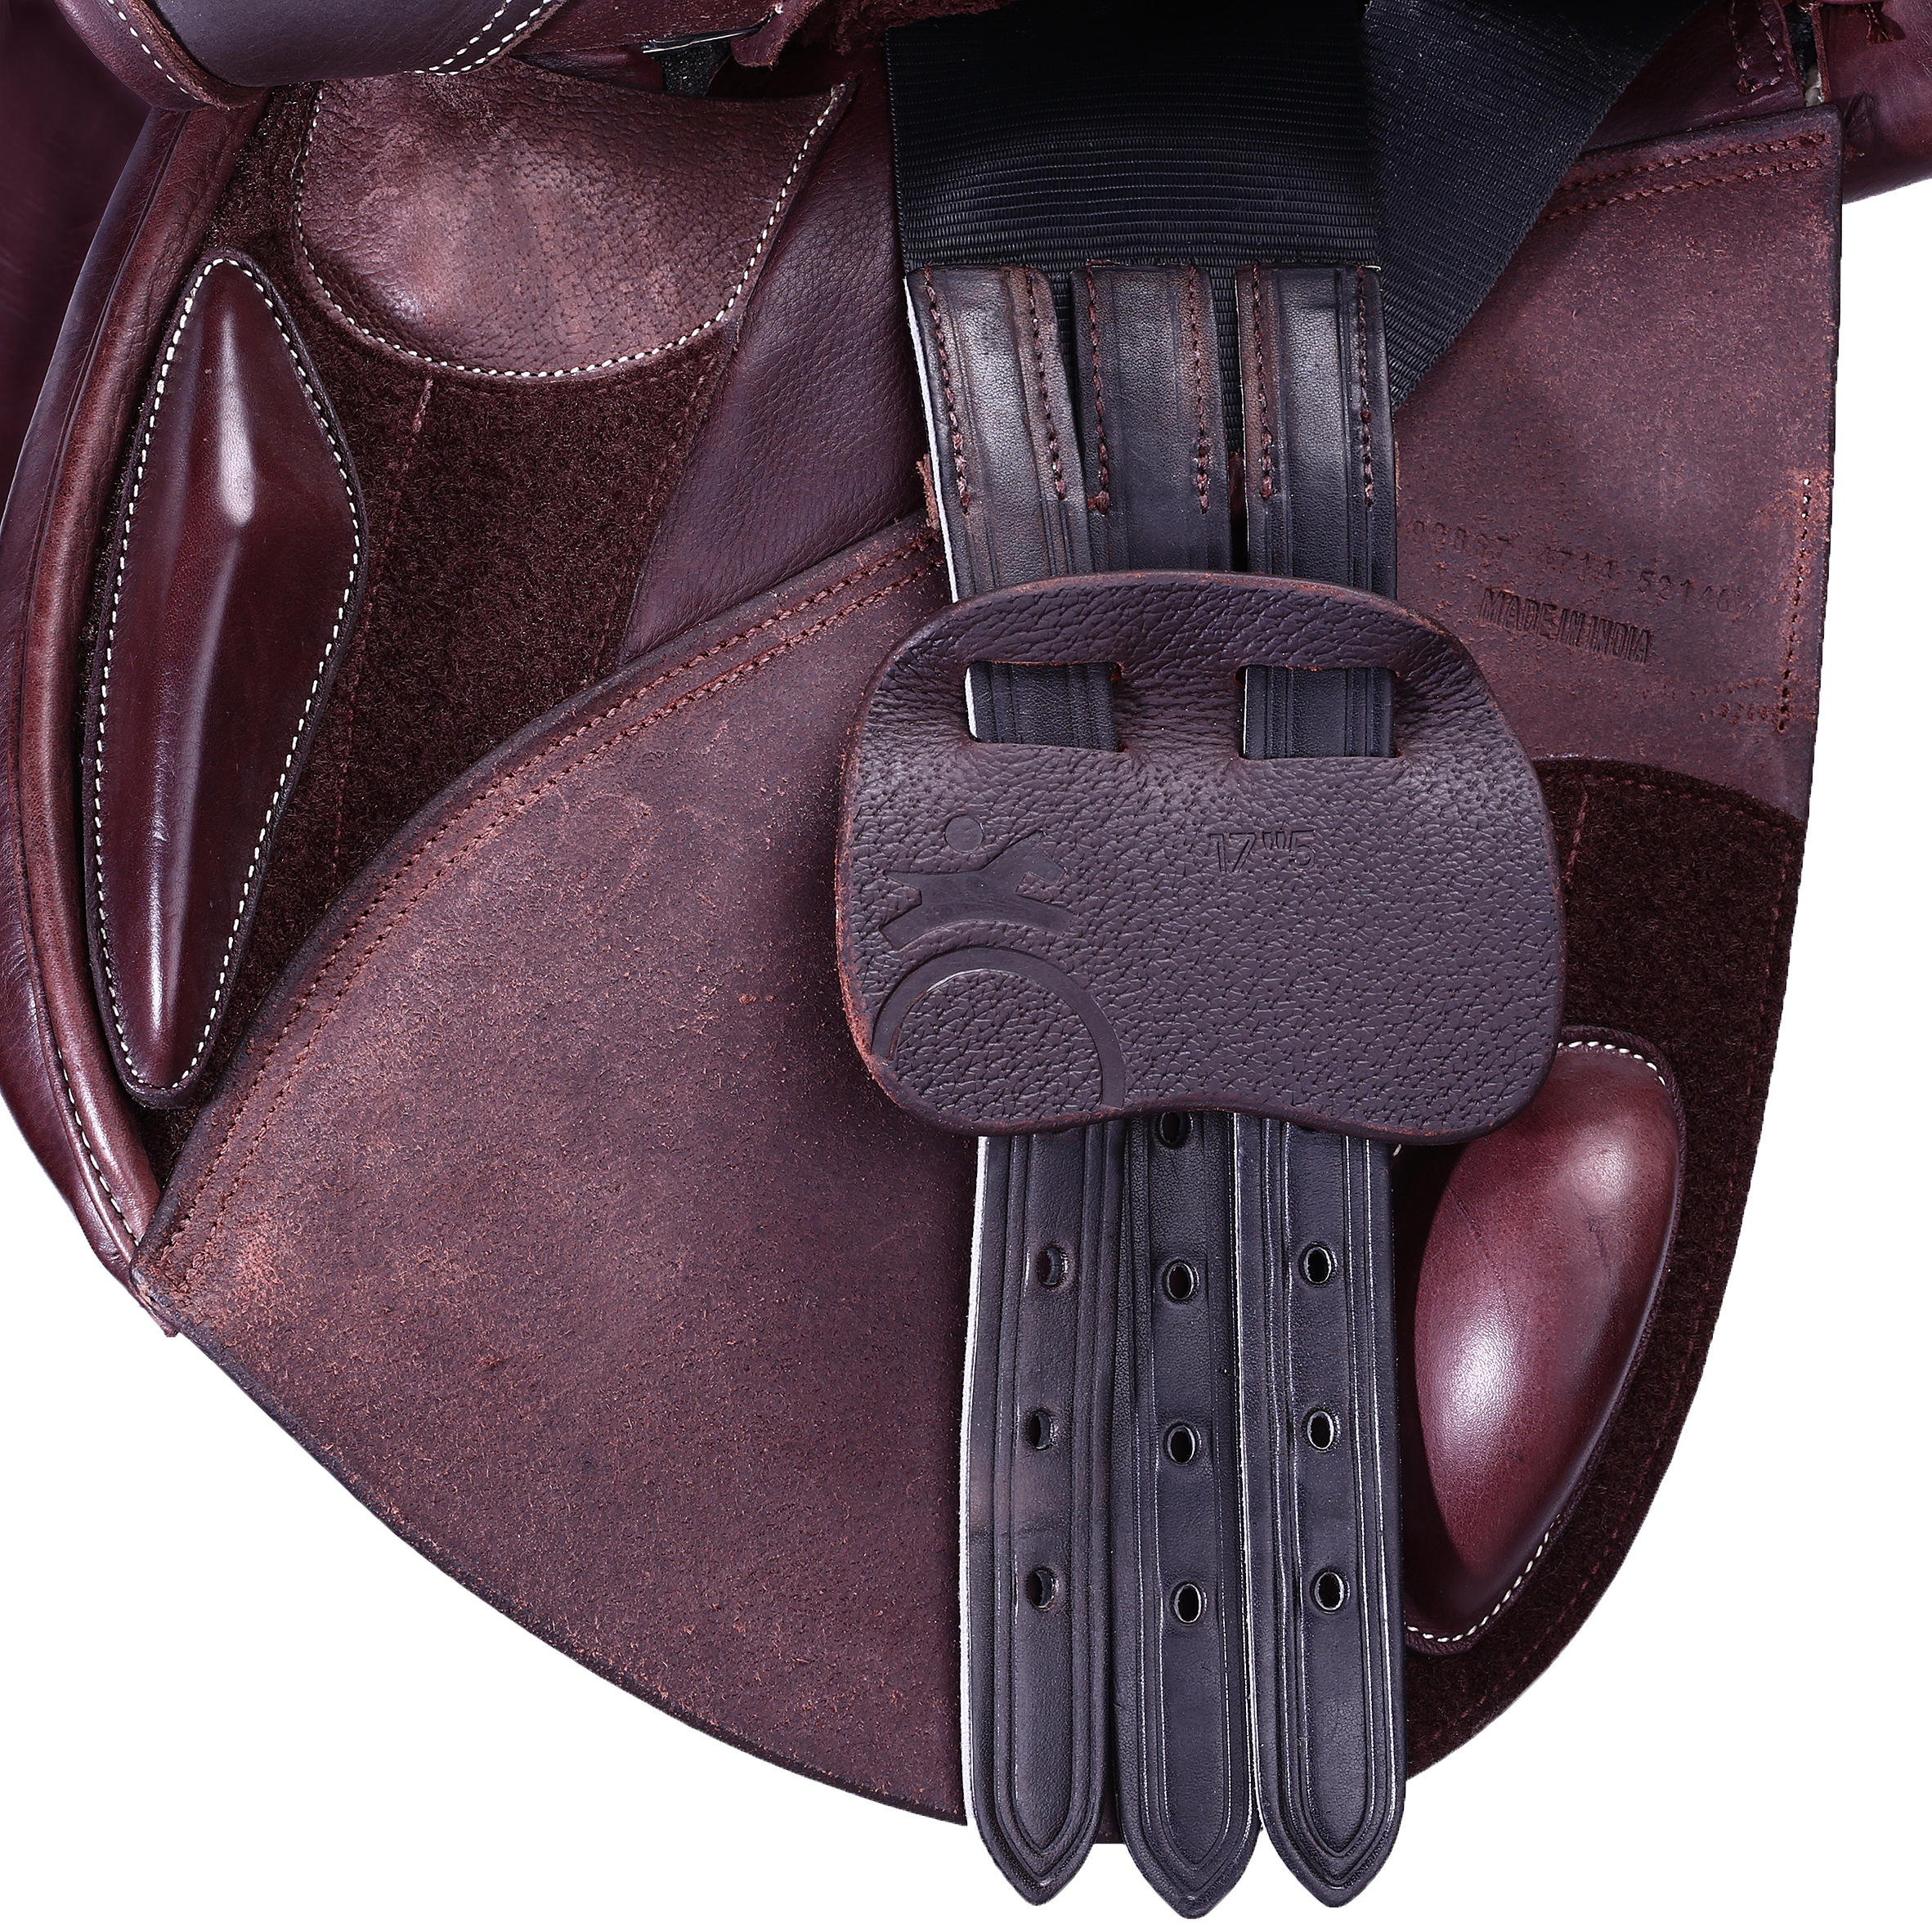 17.5" Versatile Leather Horse Riding Saddle for Horse - Brown 6/15